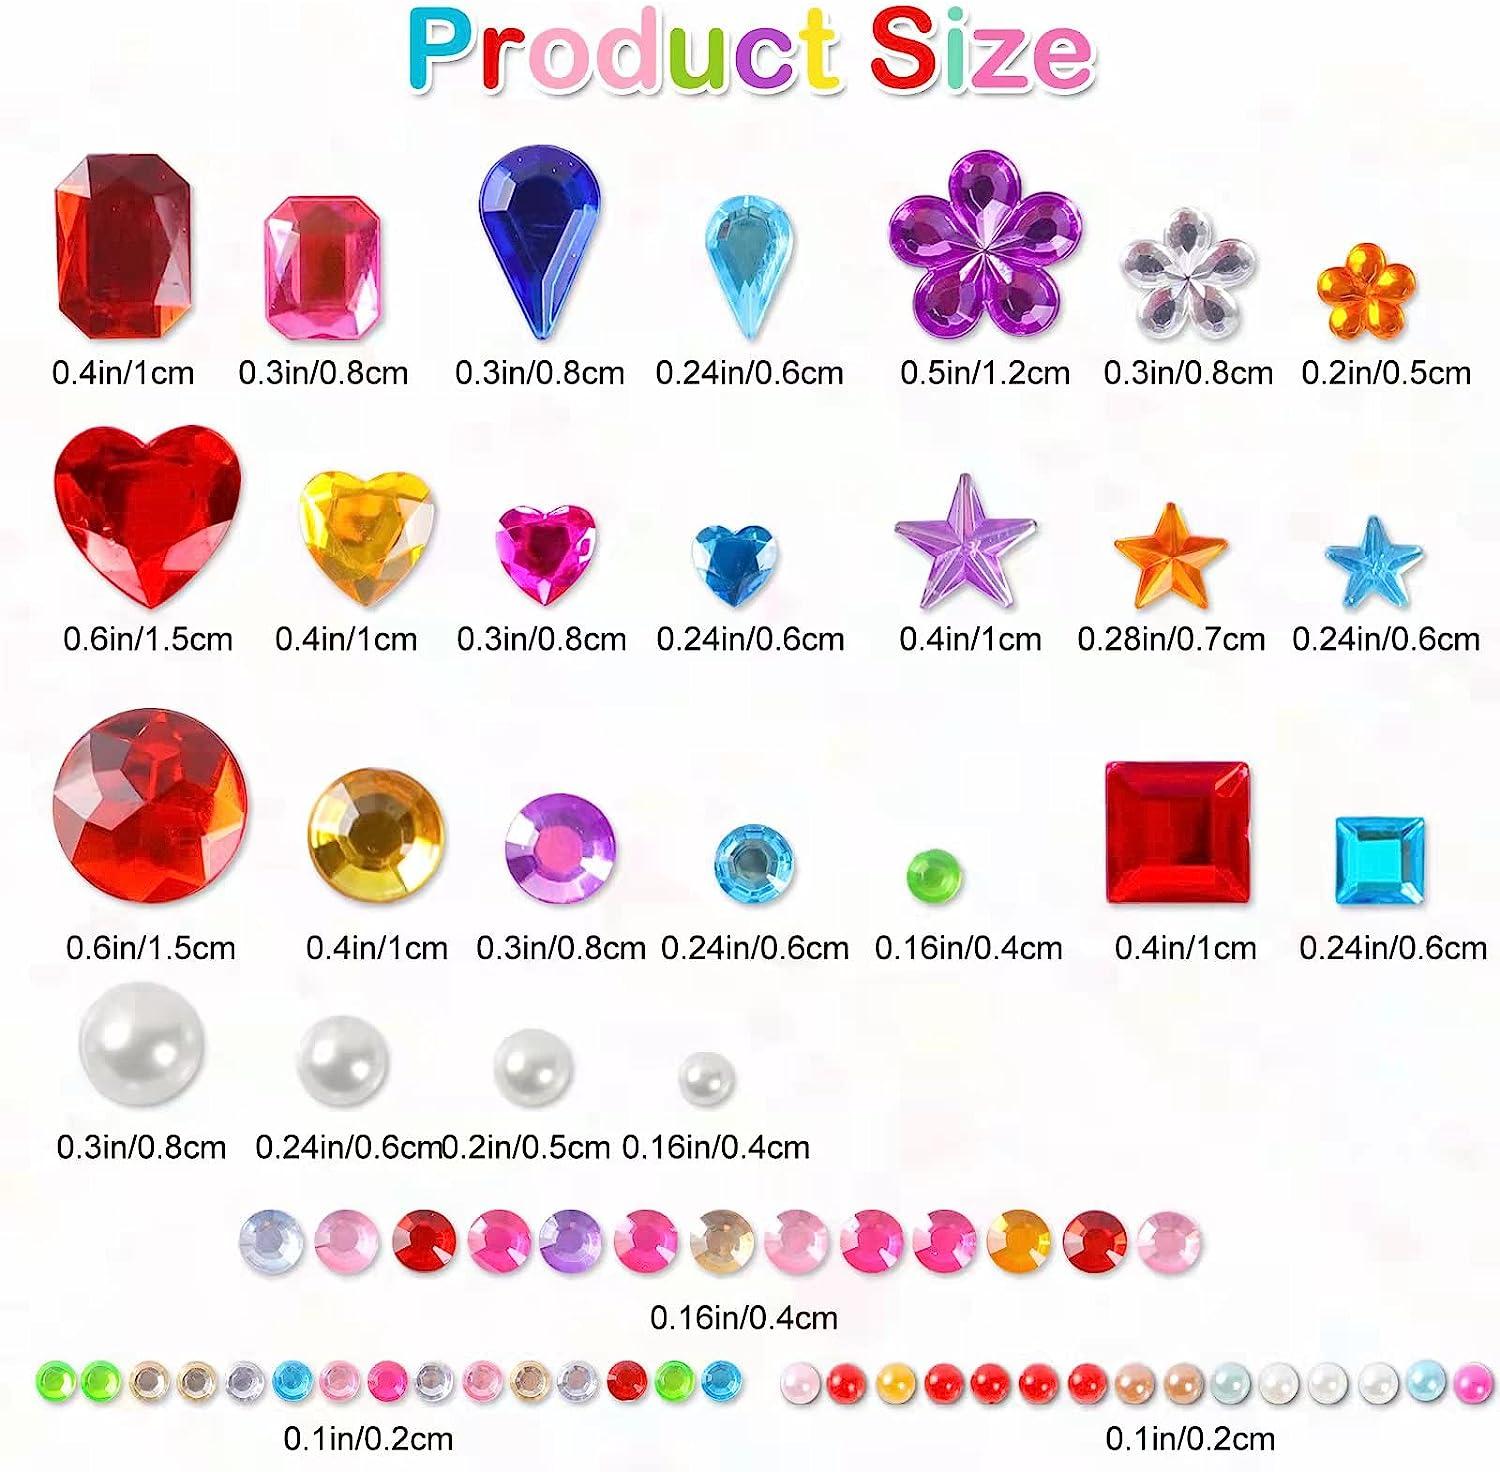 MYDBUYSOME 2774pcs Gem Stickers Jewels for Crafts - Self Adhesive  Rhinestone Jewel Stickers Stick on Gems Rhinestones for Crafts Acrylic  Bling Heart Stickers Craft Supplies for Kids